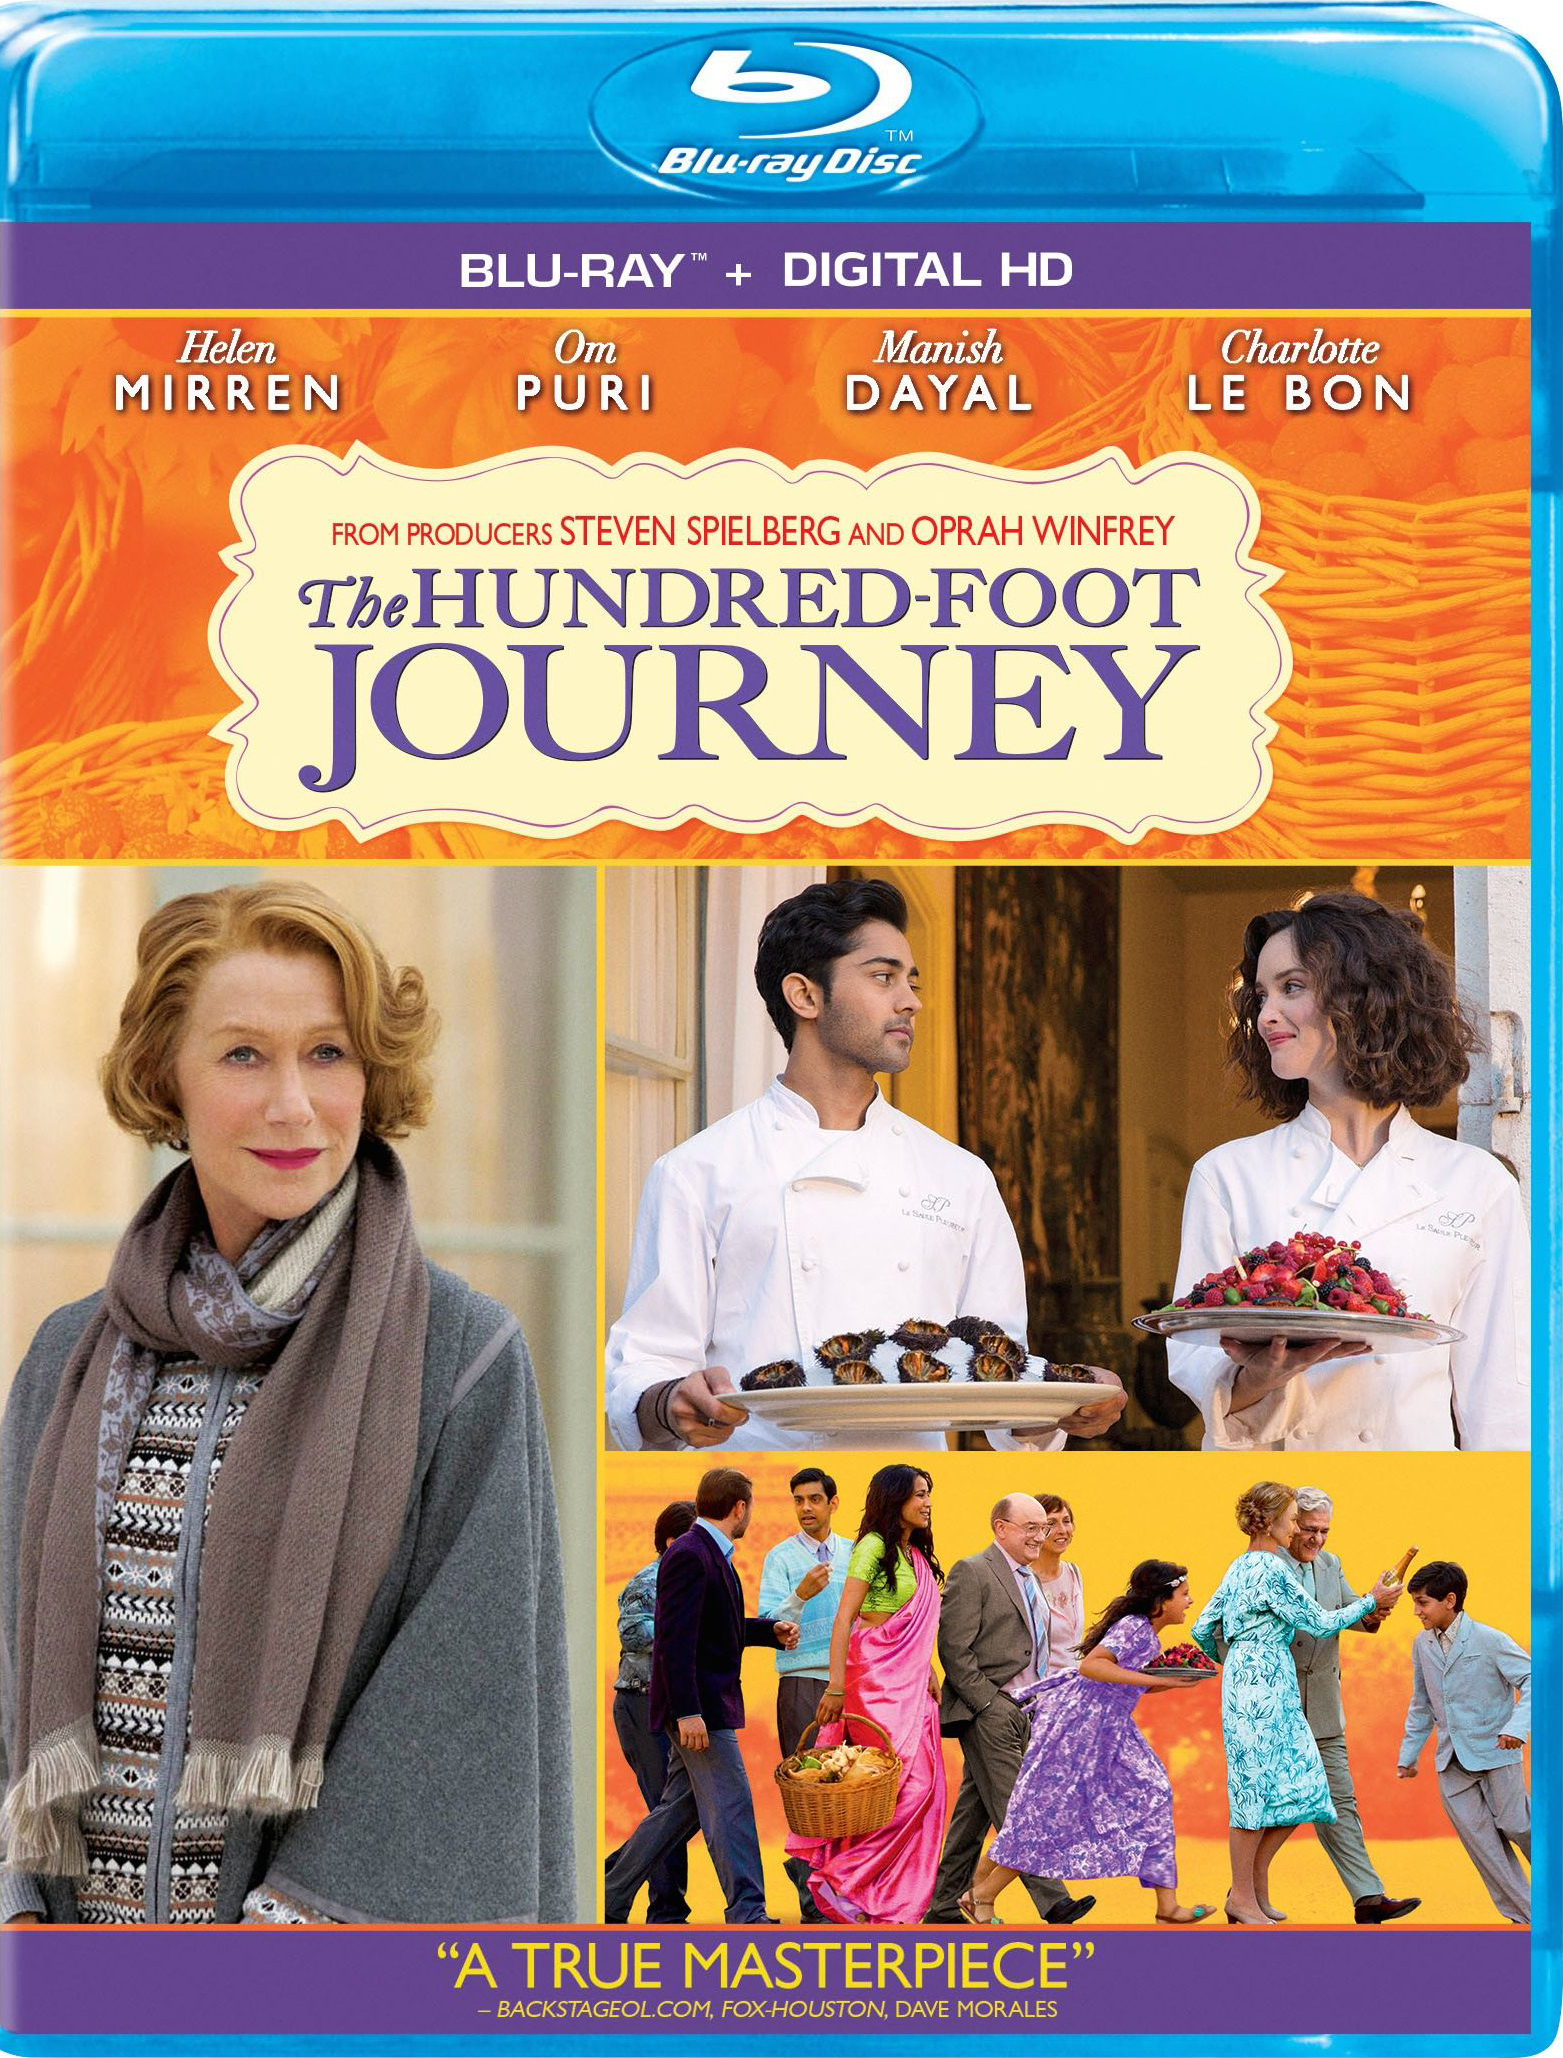 The Hundred-Foot Journey Blu-ray Review